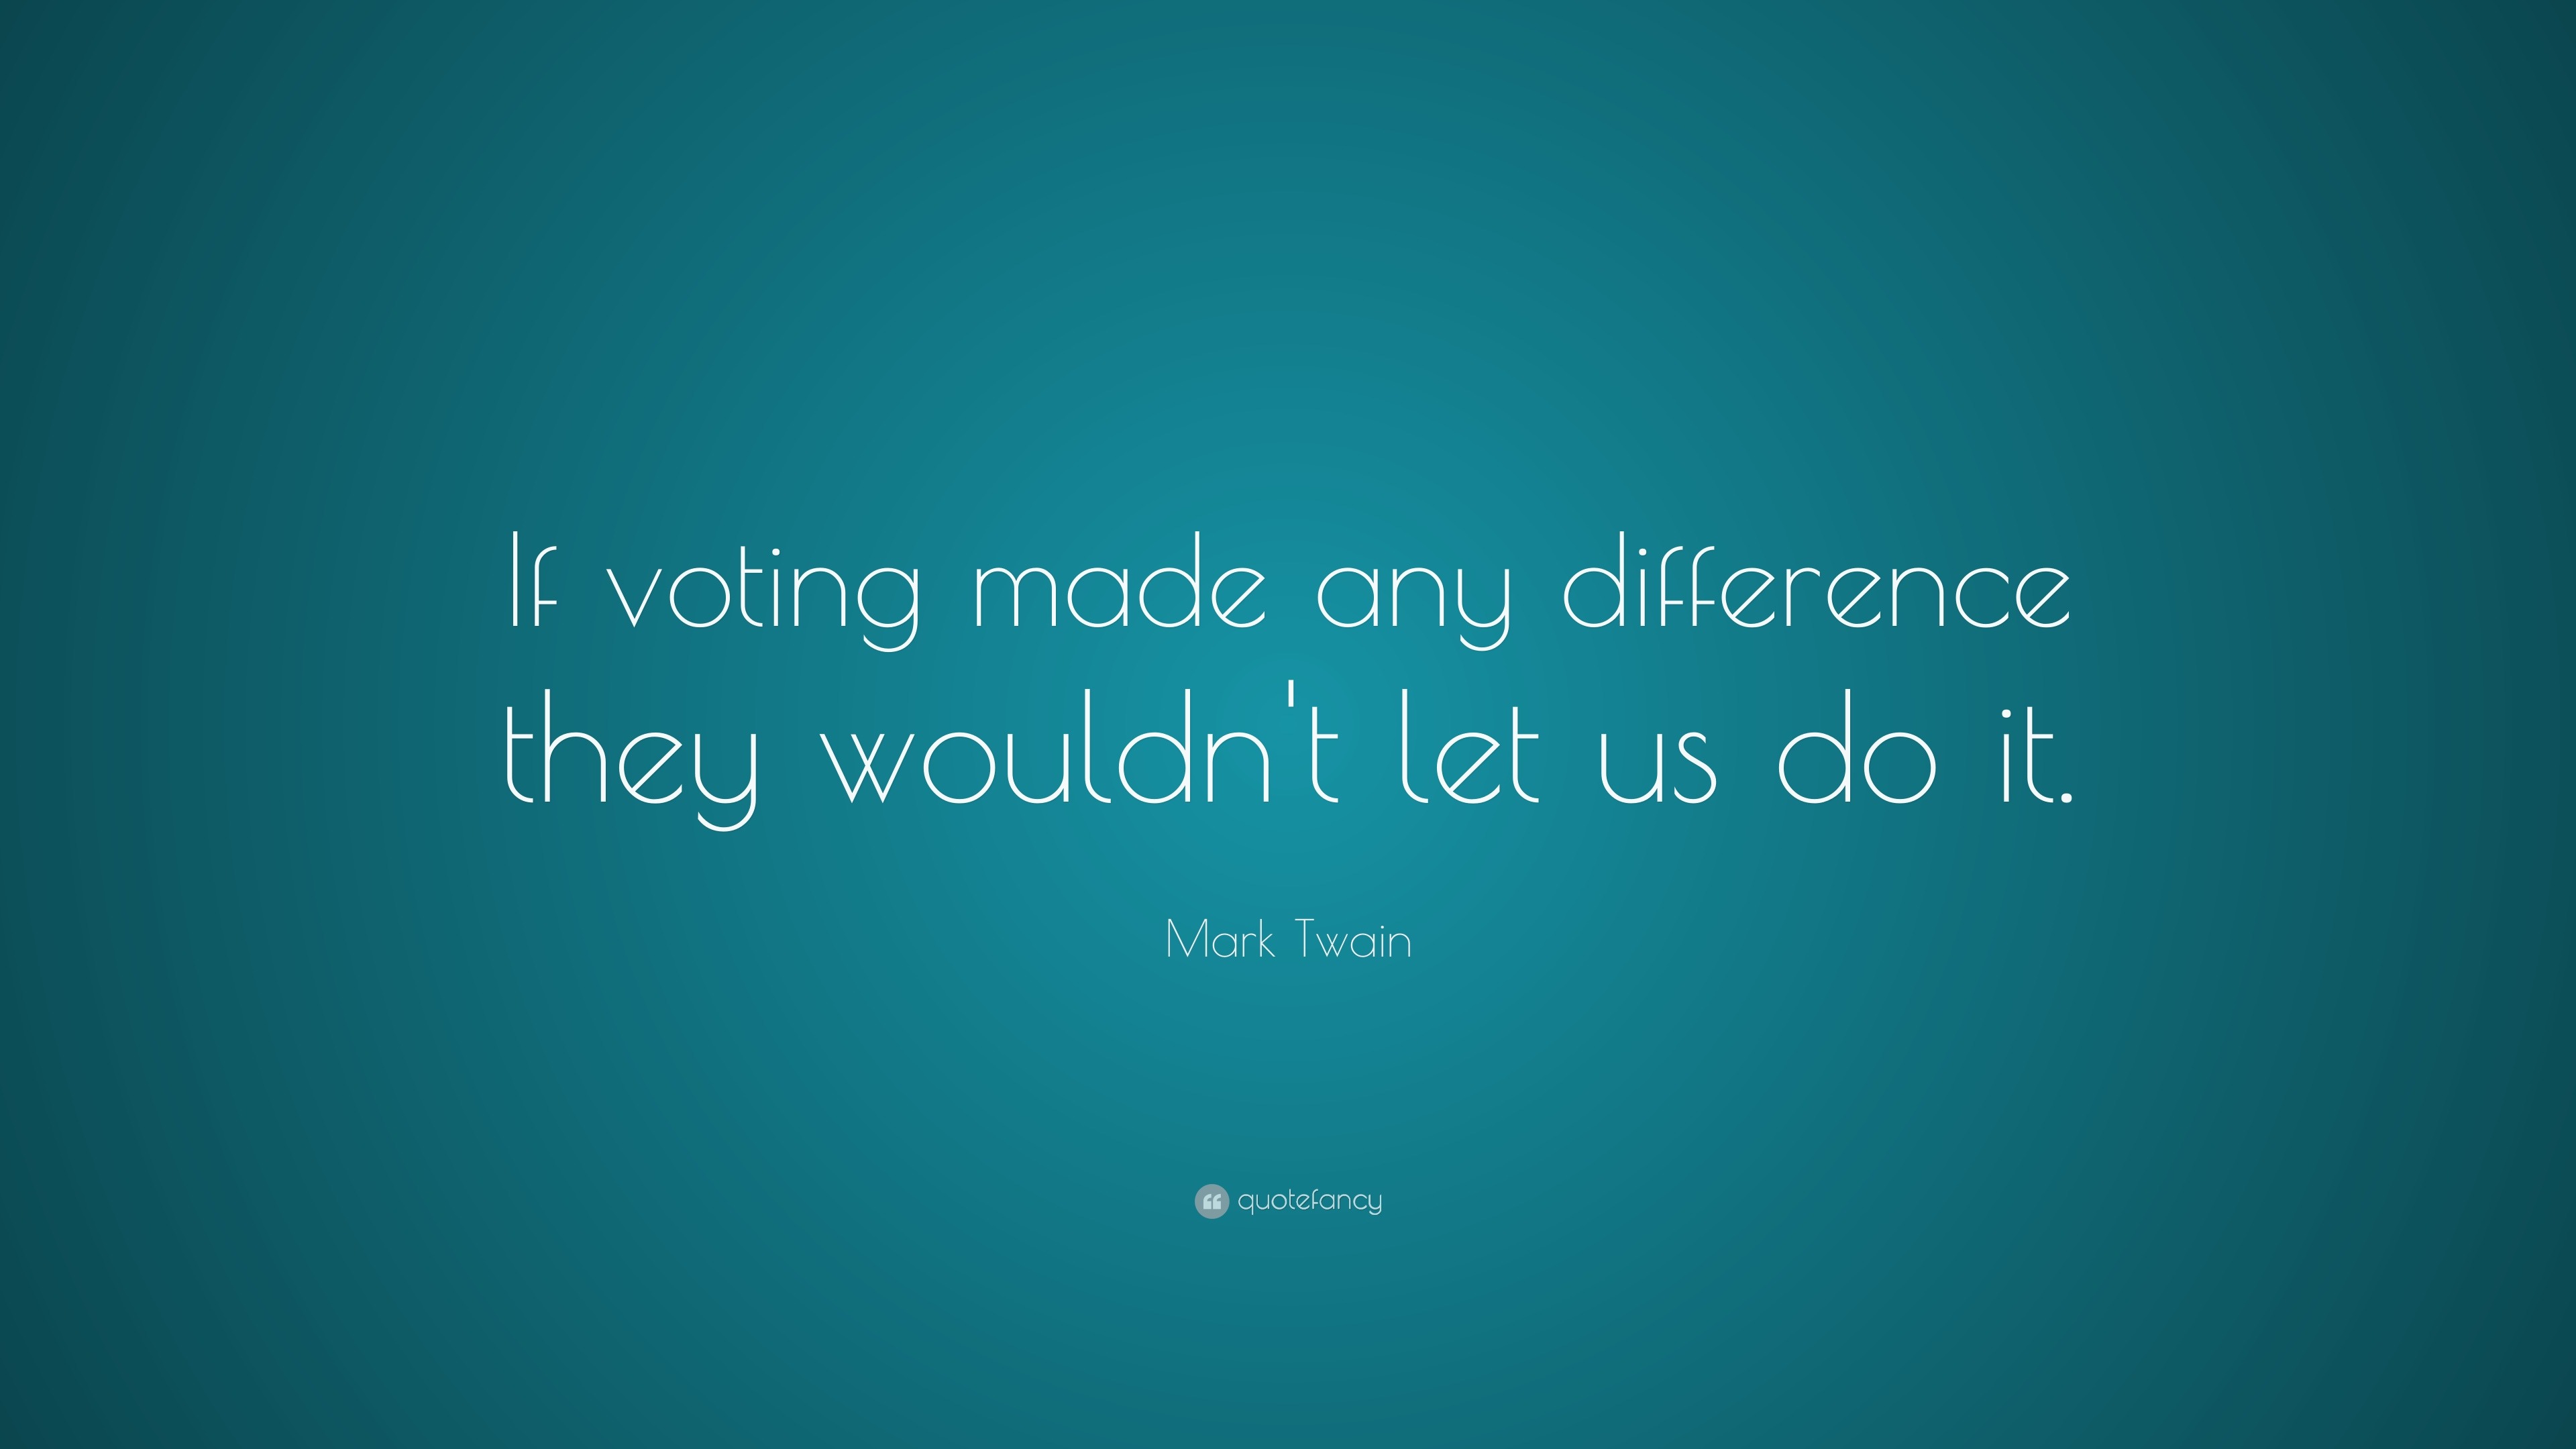 Mark Twain Quote: “If voting made any difference they wouldn’t let us do it ...